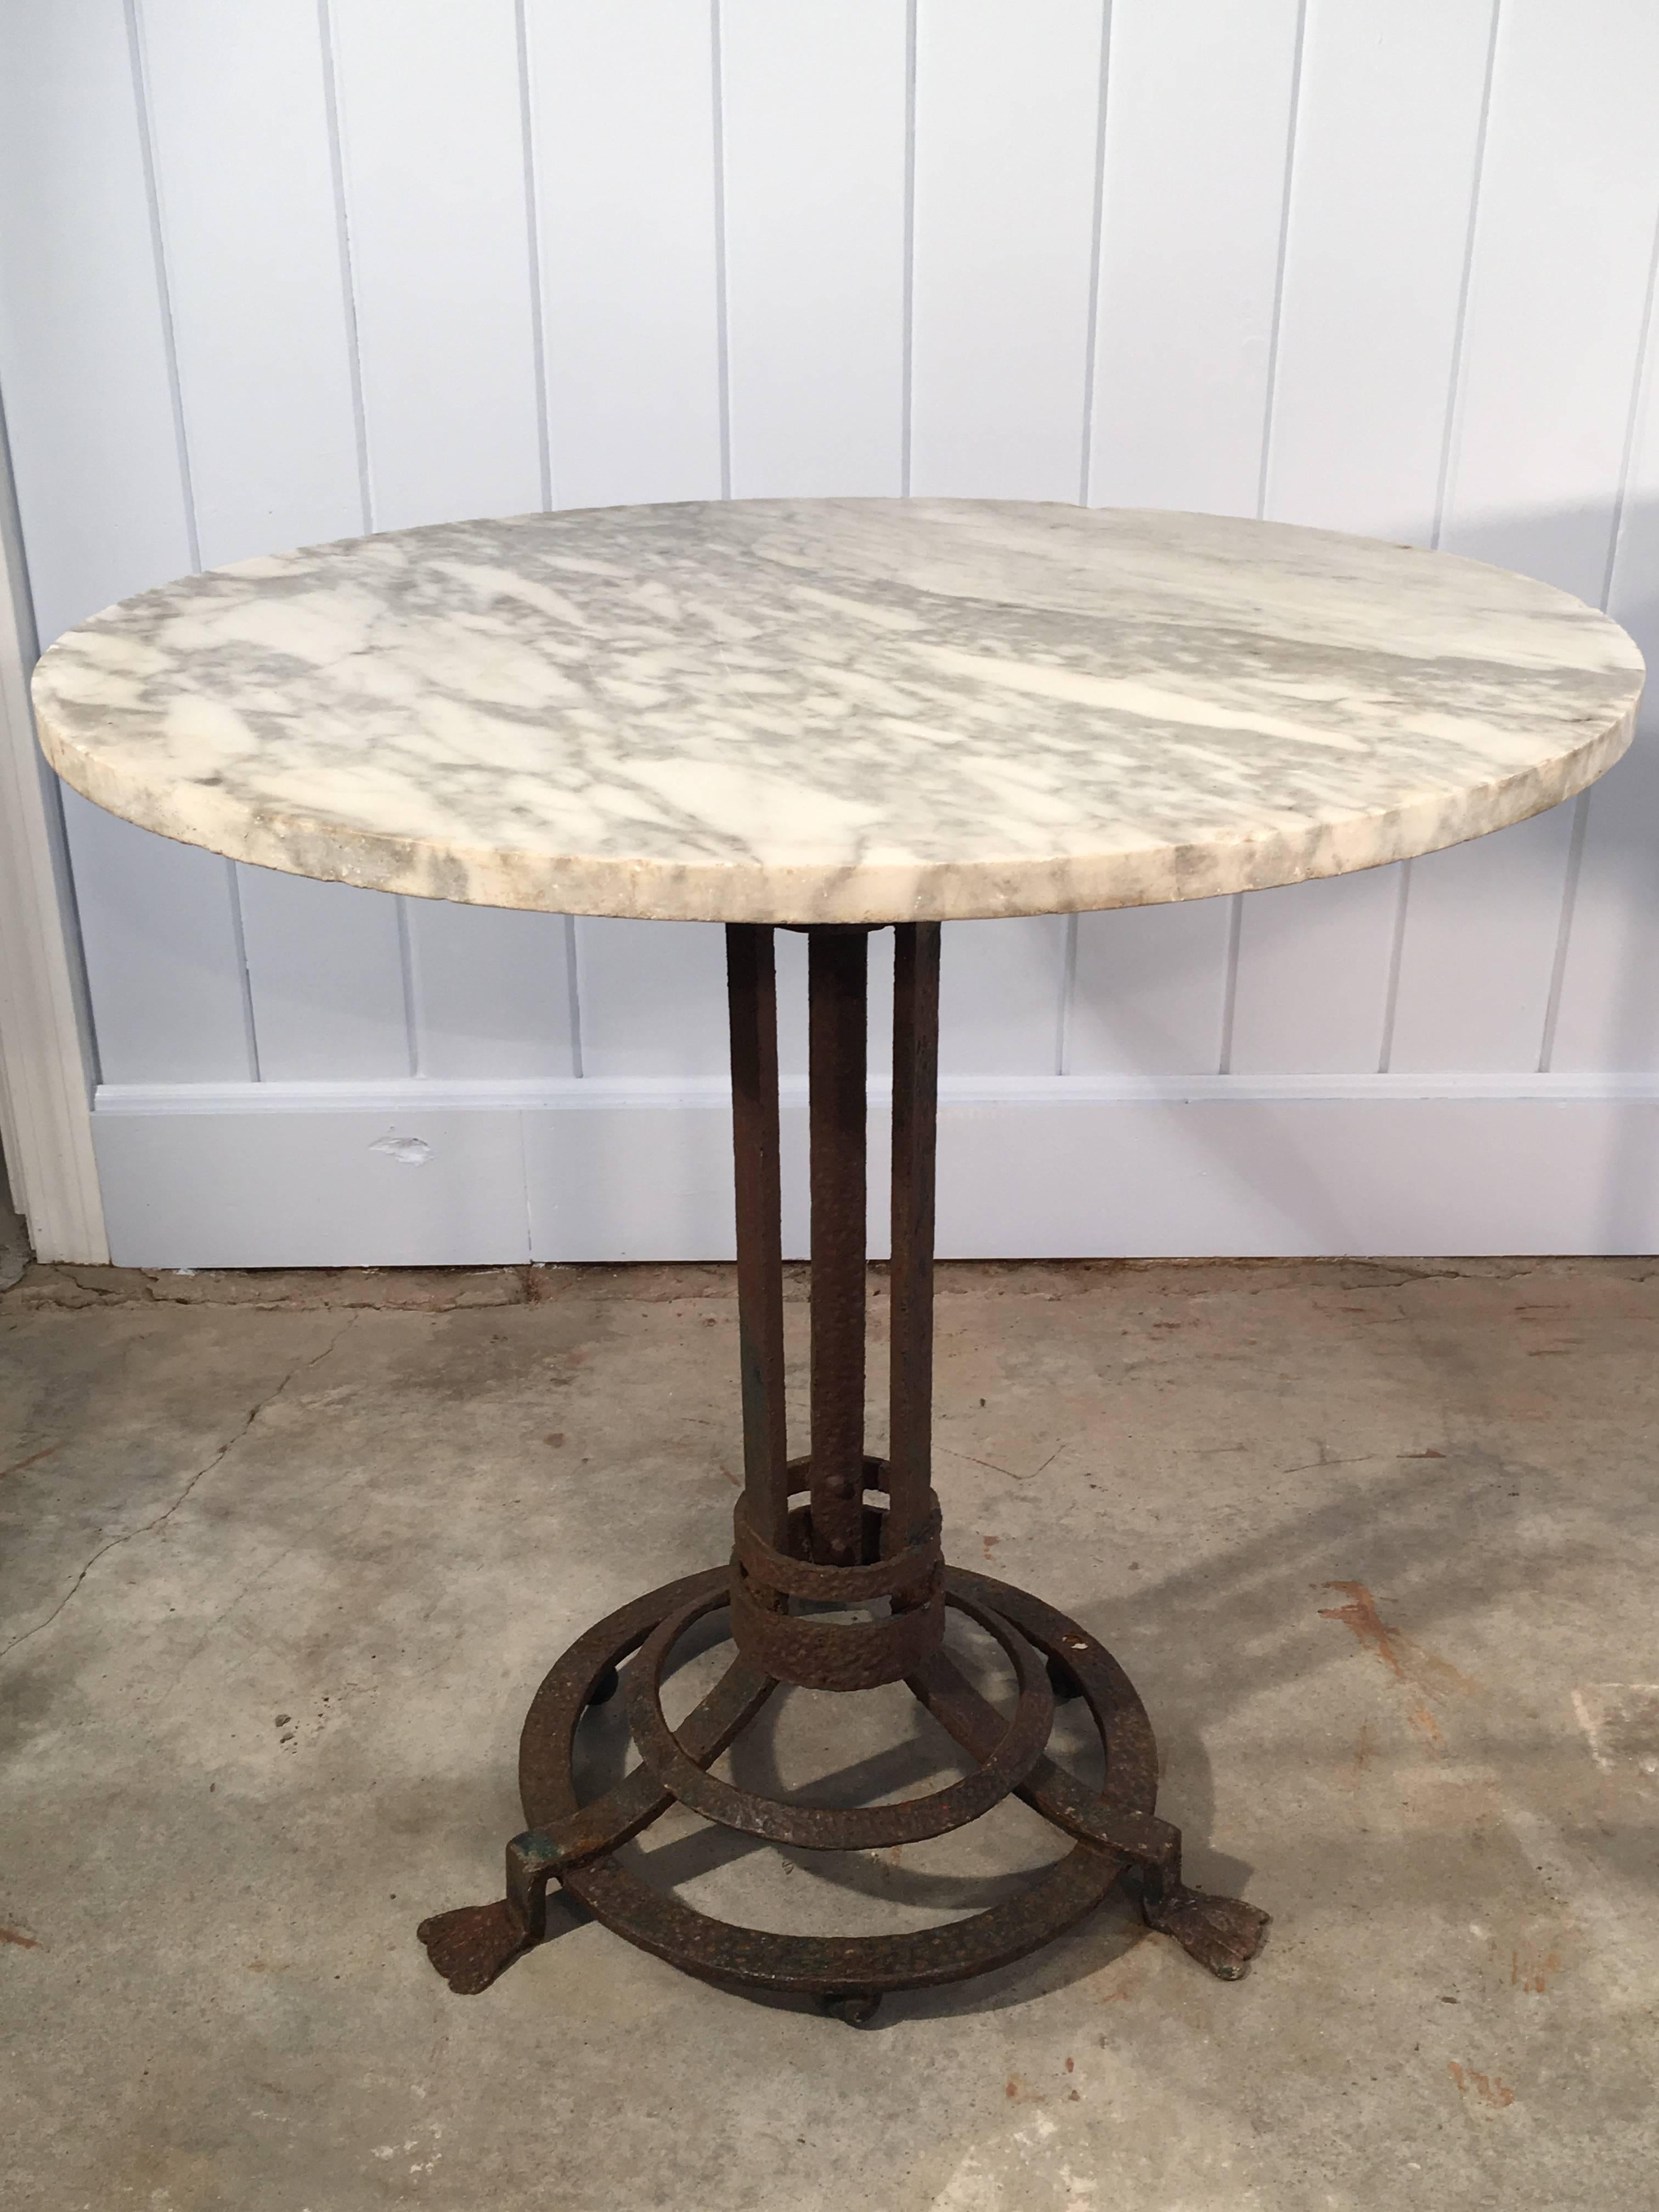 This pair of mid-19th century hand-wrought gueridon bases features a wonderful rusty patina and splay feet which are quite unusual and very decorative. We have topped them with rounds of 3/4" thick late 19th century English marble (white with